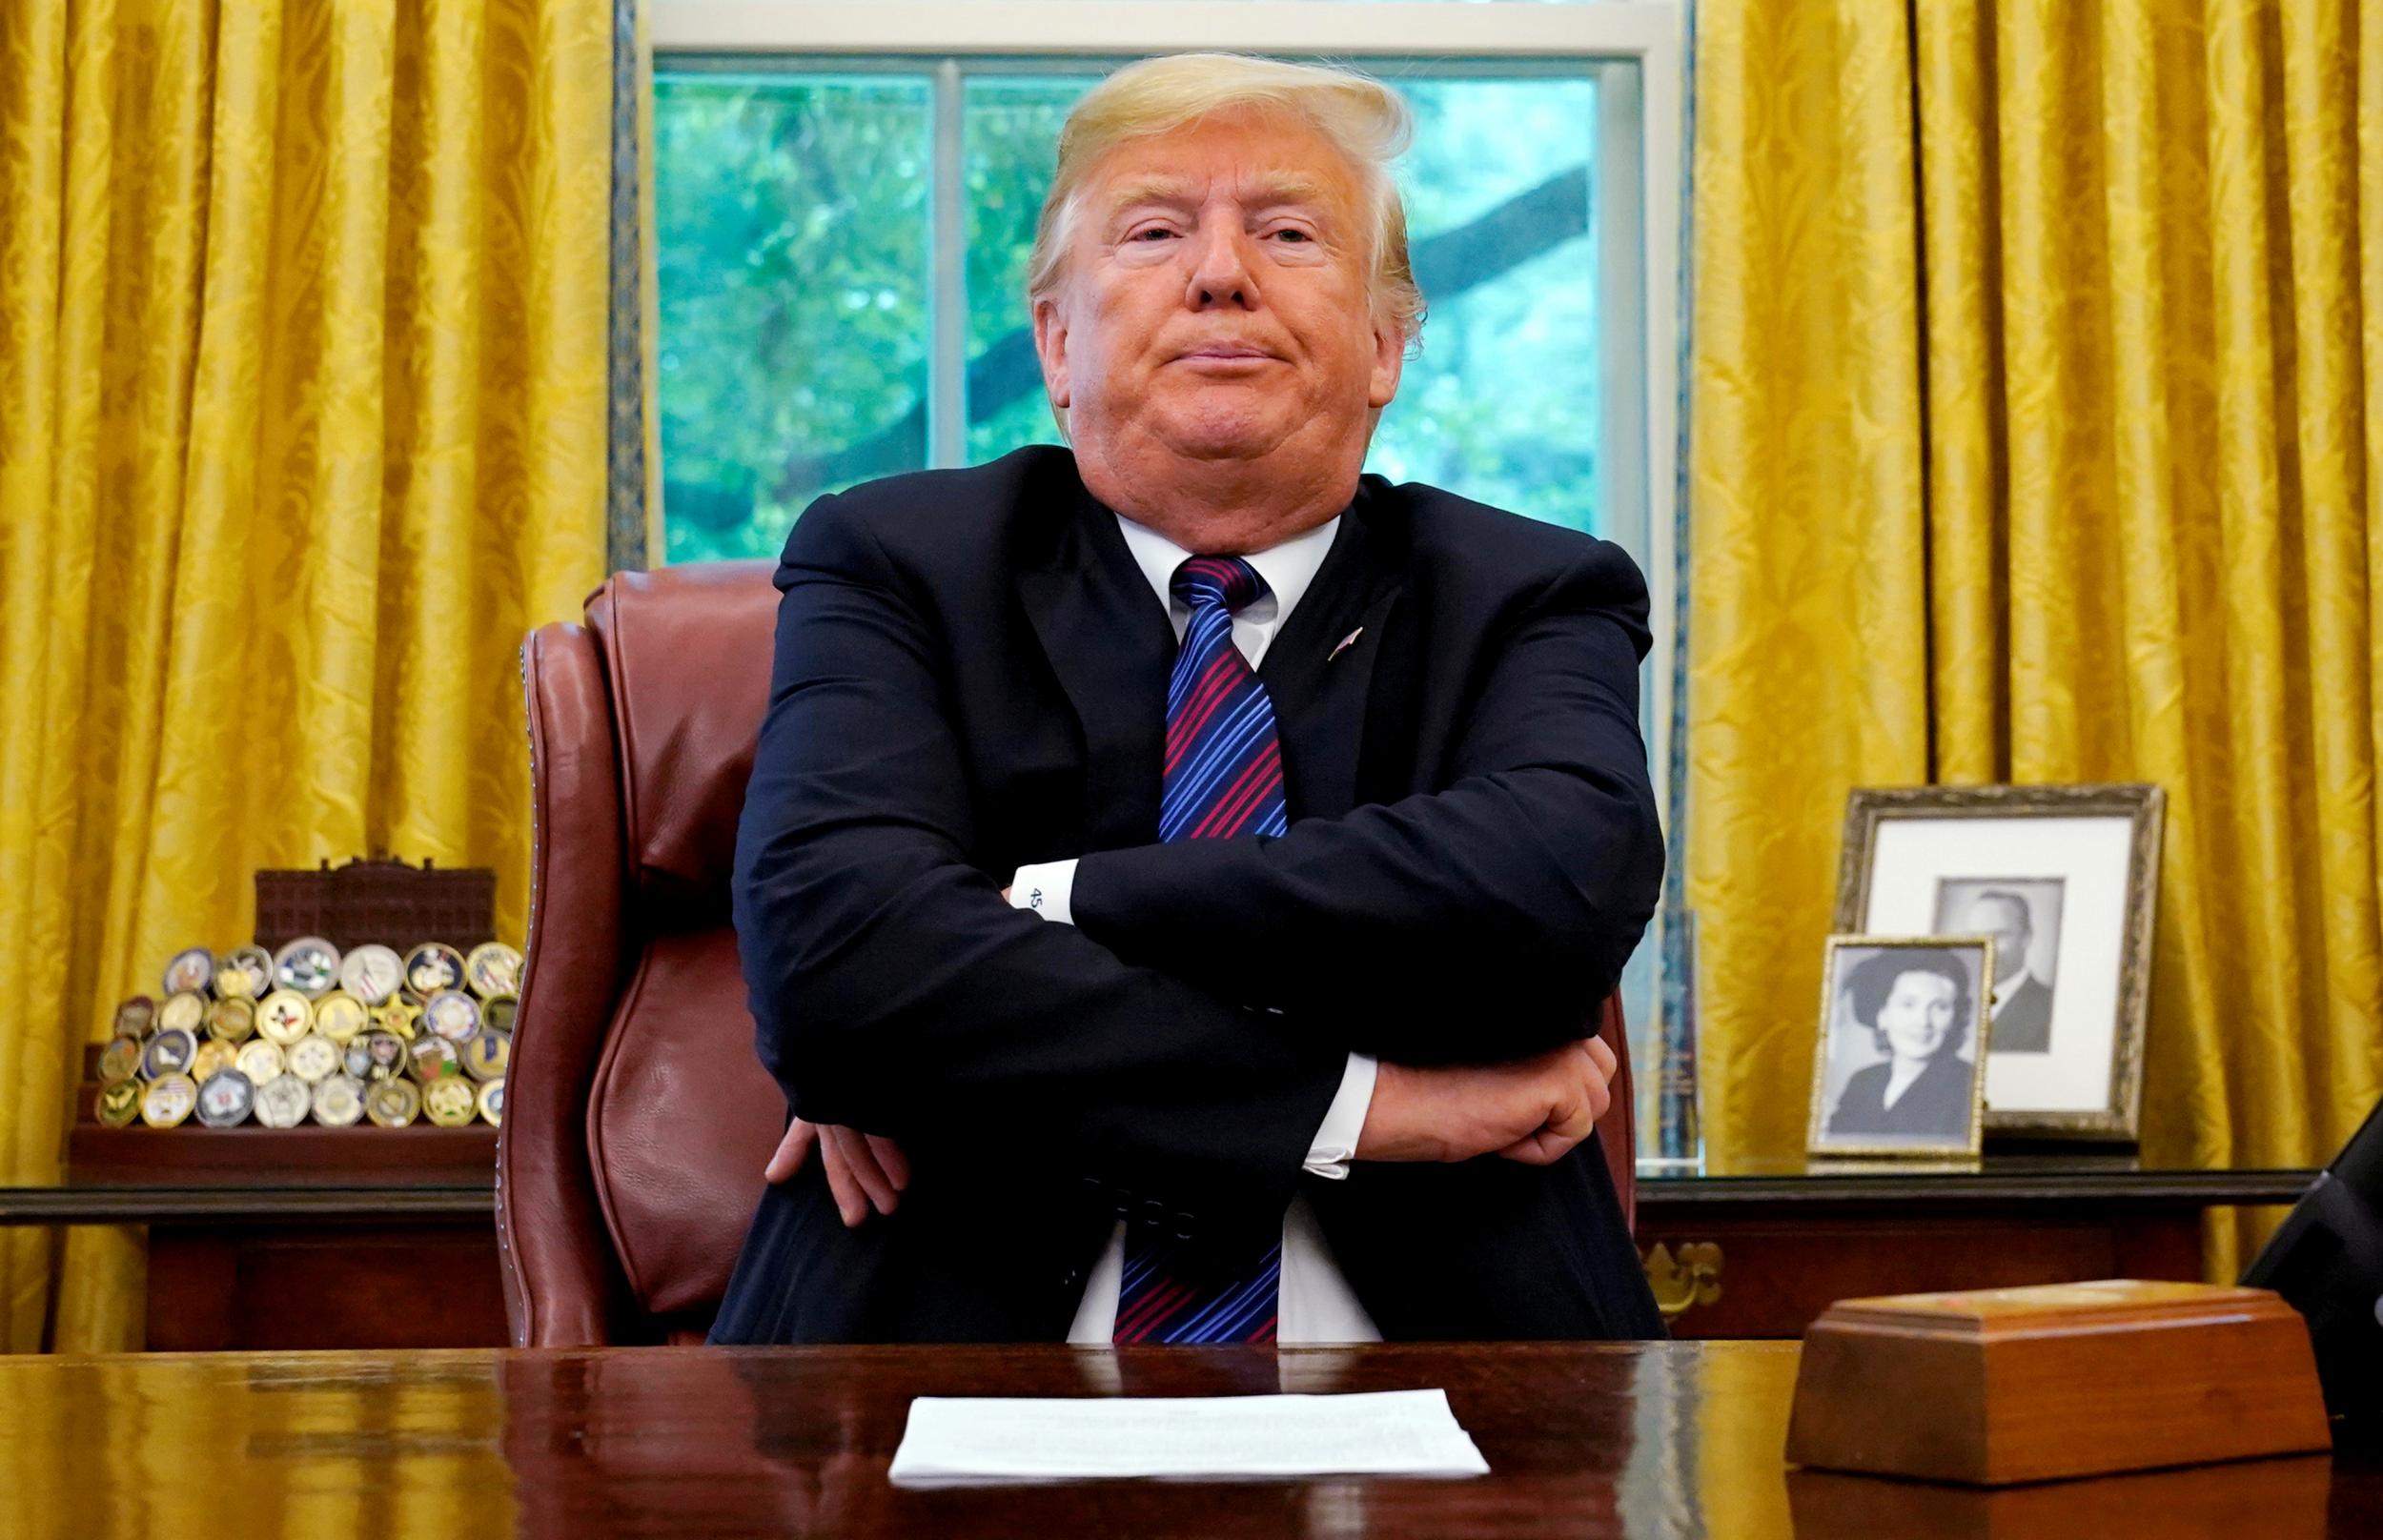 President Donald Trump sits behind his desk as he announces a bilateral trade agreement with Mexico to replace the North American Free Trade Agreement (NAFTA) at the White House in Washington, 27 August 2018